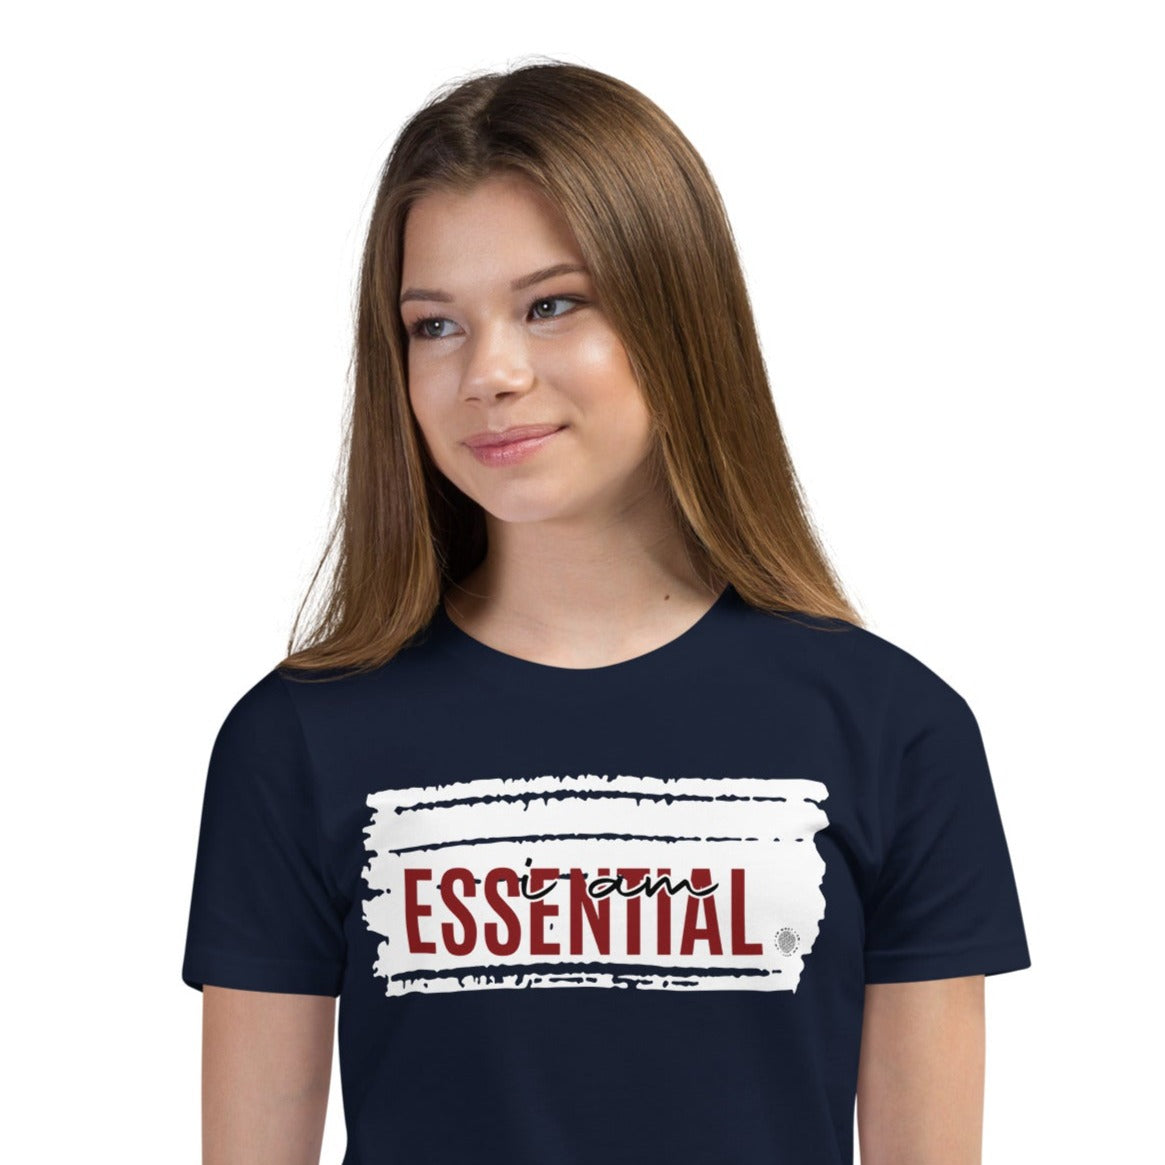 Our ‘I Am Essential’ affirmation youth t-shirt describes how important your son or daughter will be to your family and to the world. Your child is destined to do great things. Positive quotes can build their confidence.